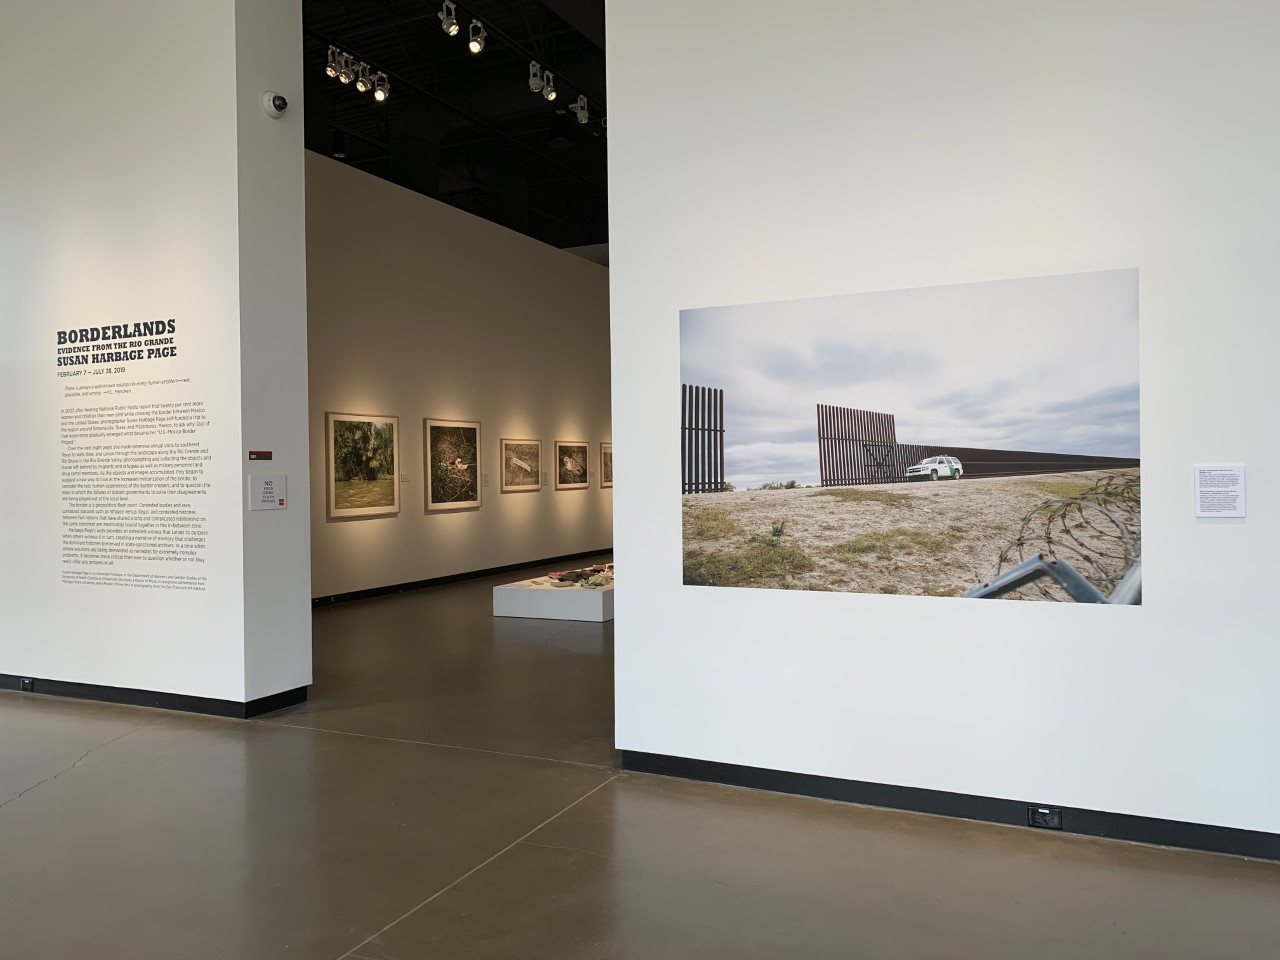 Page's work has been shown all over the world, including at the Gregg Museum of Art and Design at NC State last summer. (photo courtesy of Susan Harbage Page)